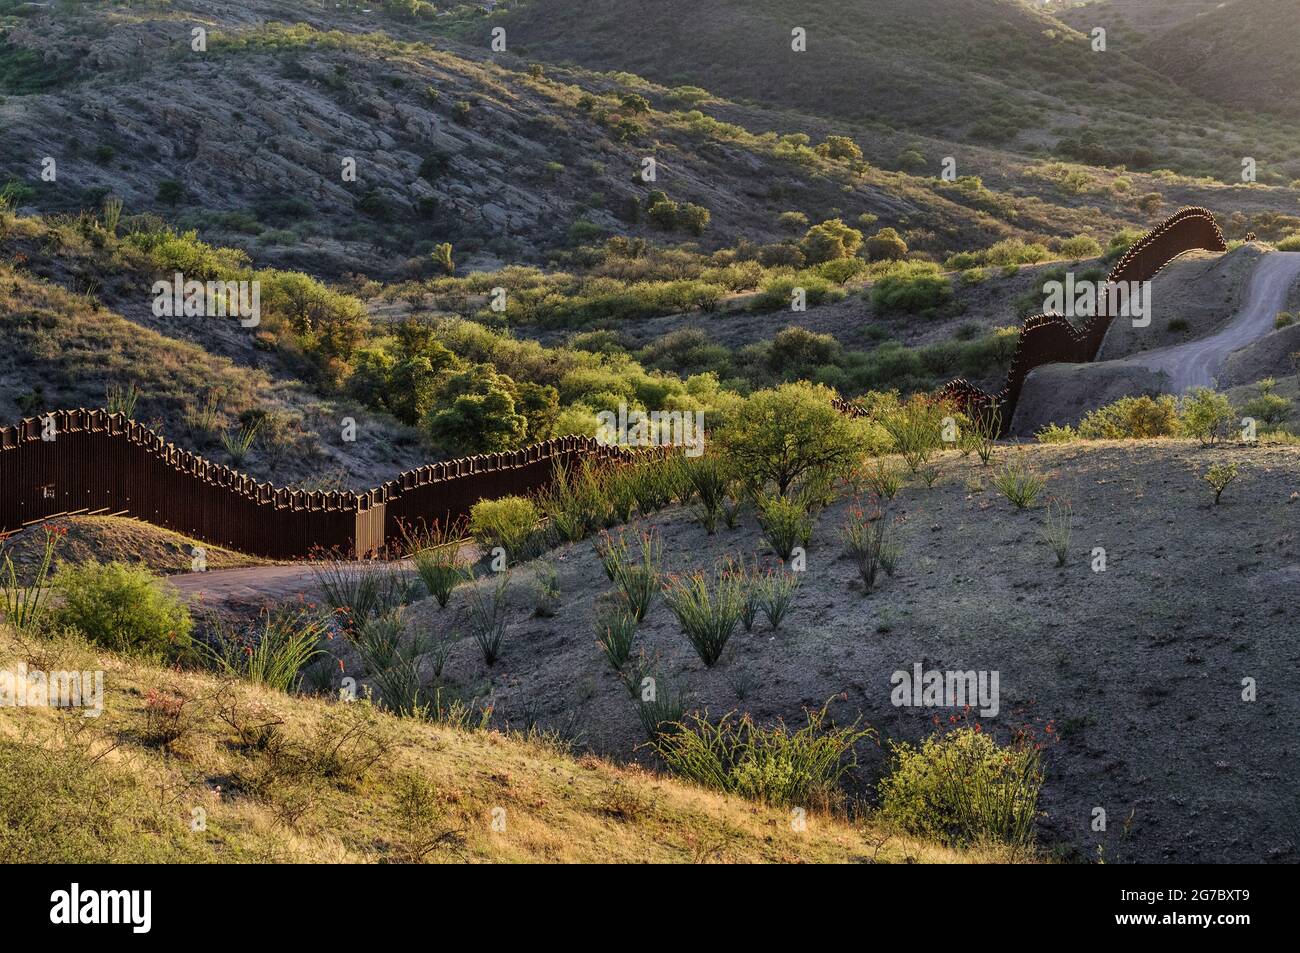 US border fence on the Mexico border, east of Nogales Arizona USA and Nogales Sonora Mexico, viewed from US side looking southwest. This location is a Stock Photo